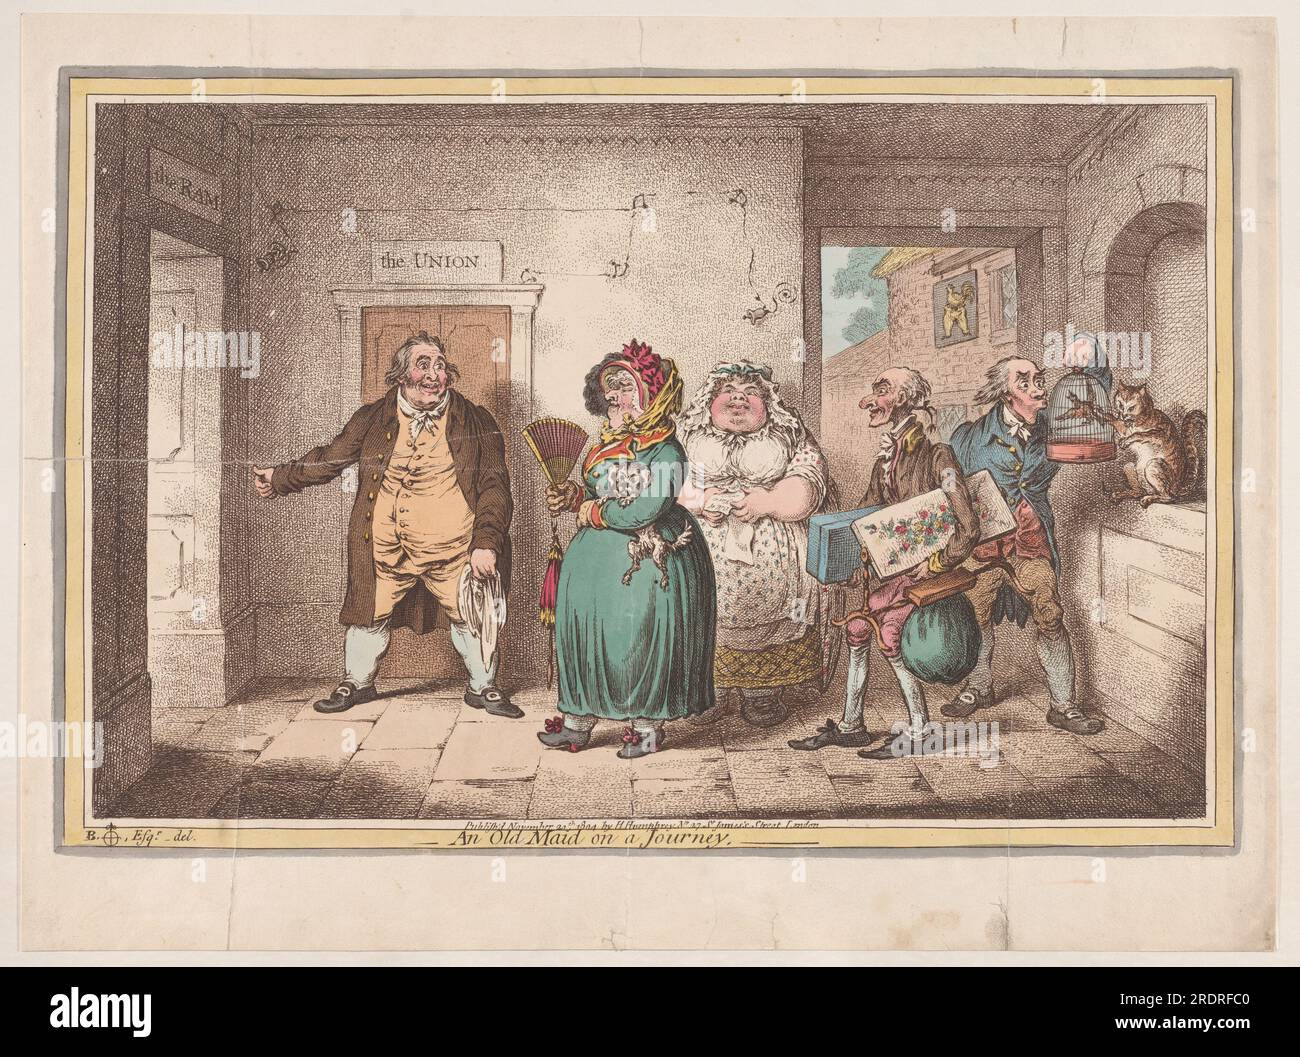 An Old Maid on a Journey 20 novembre 1804 di James Gillray Foto Stock